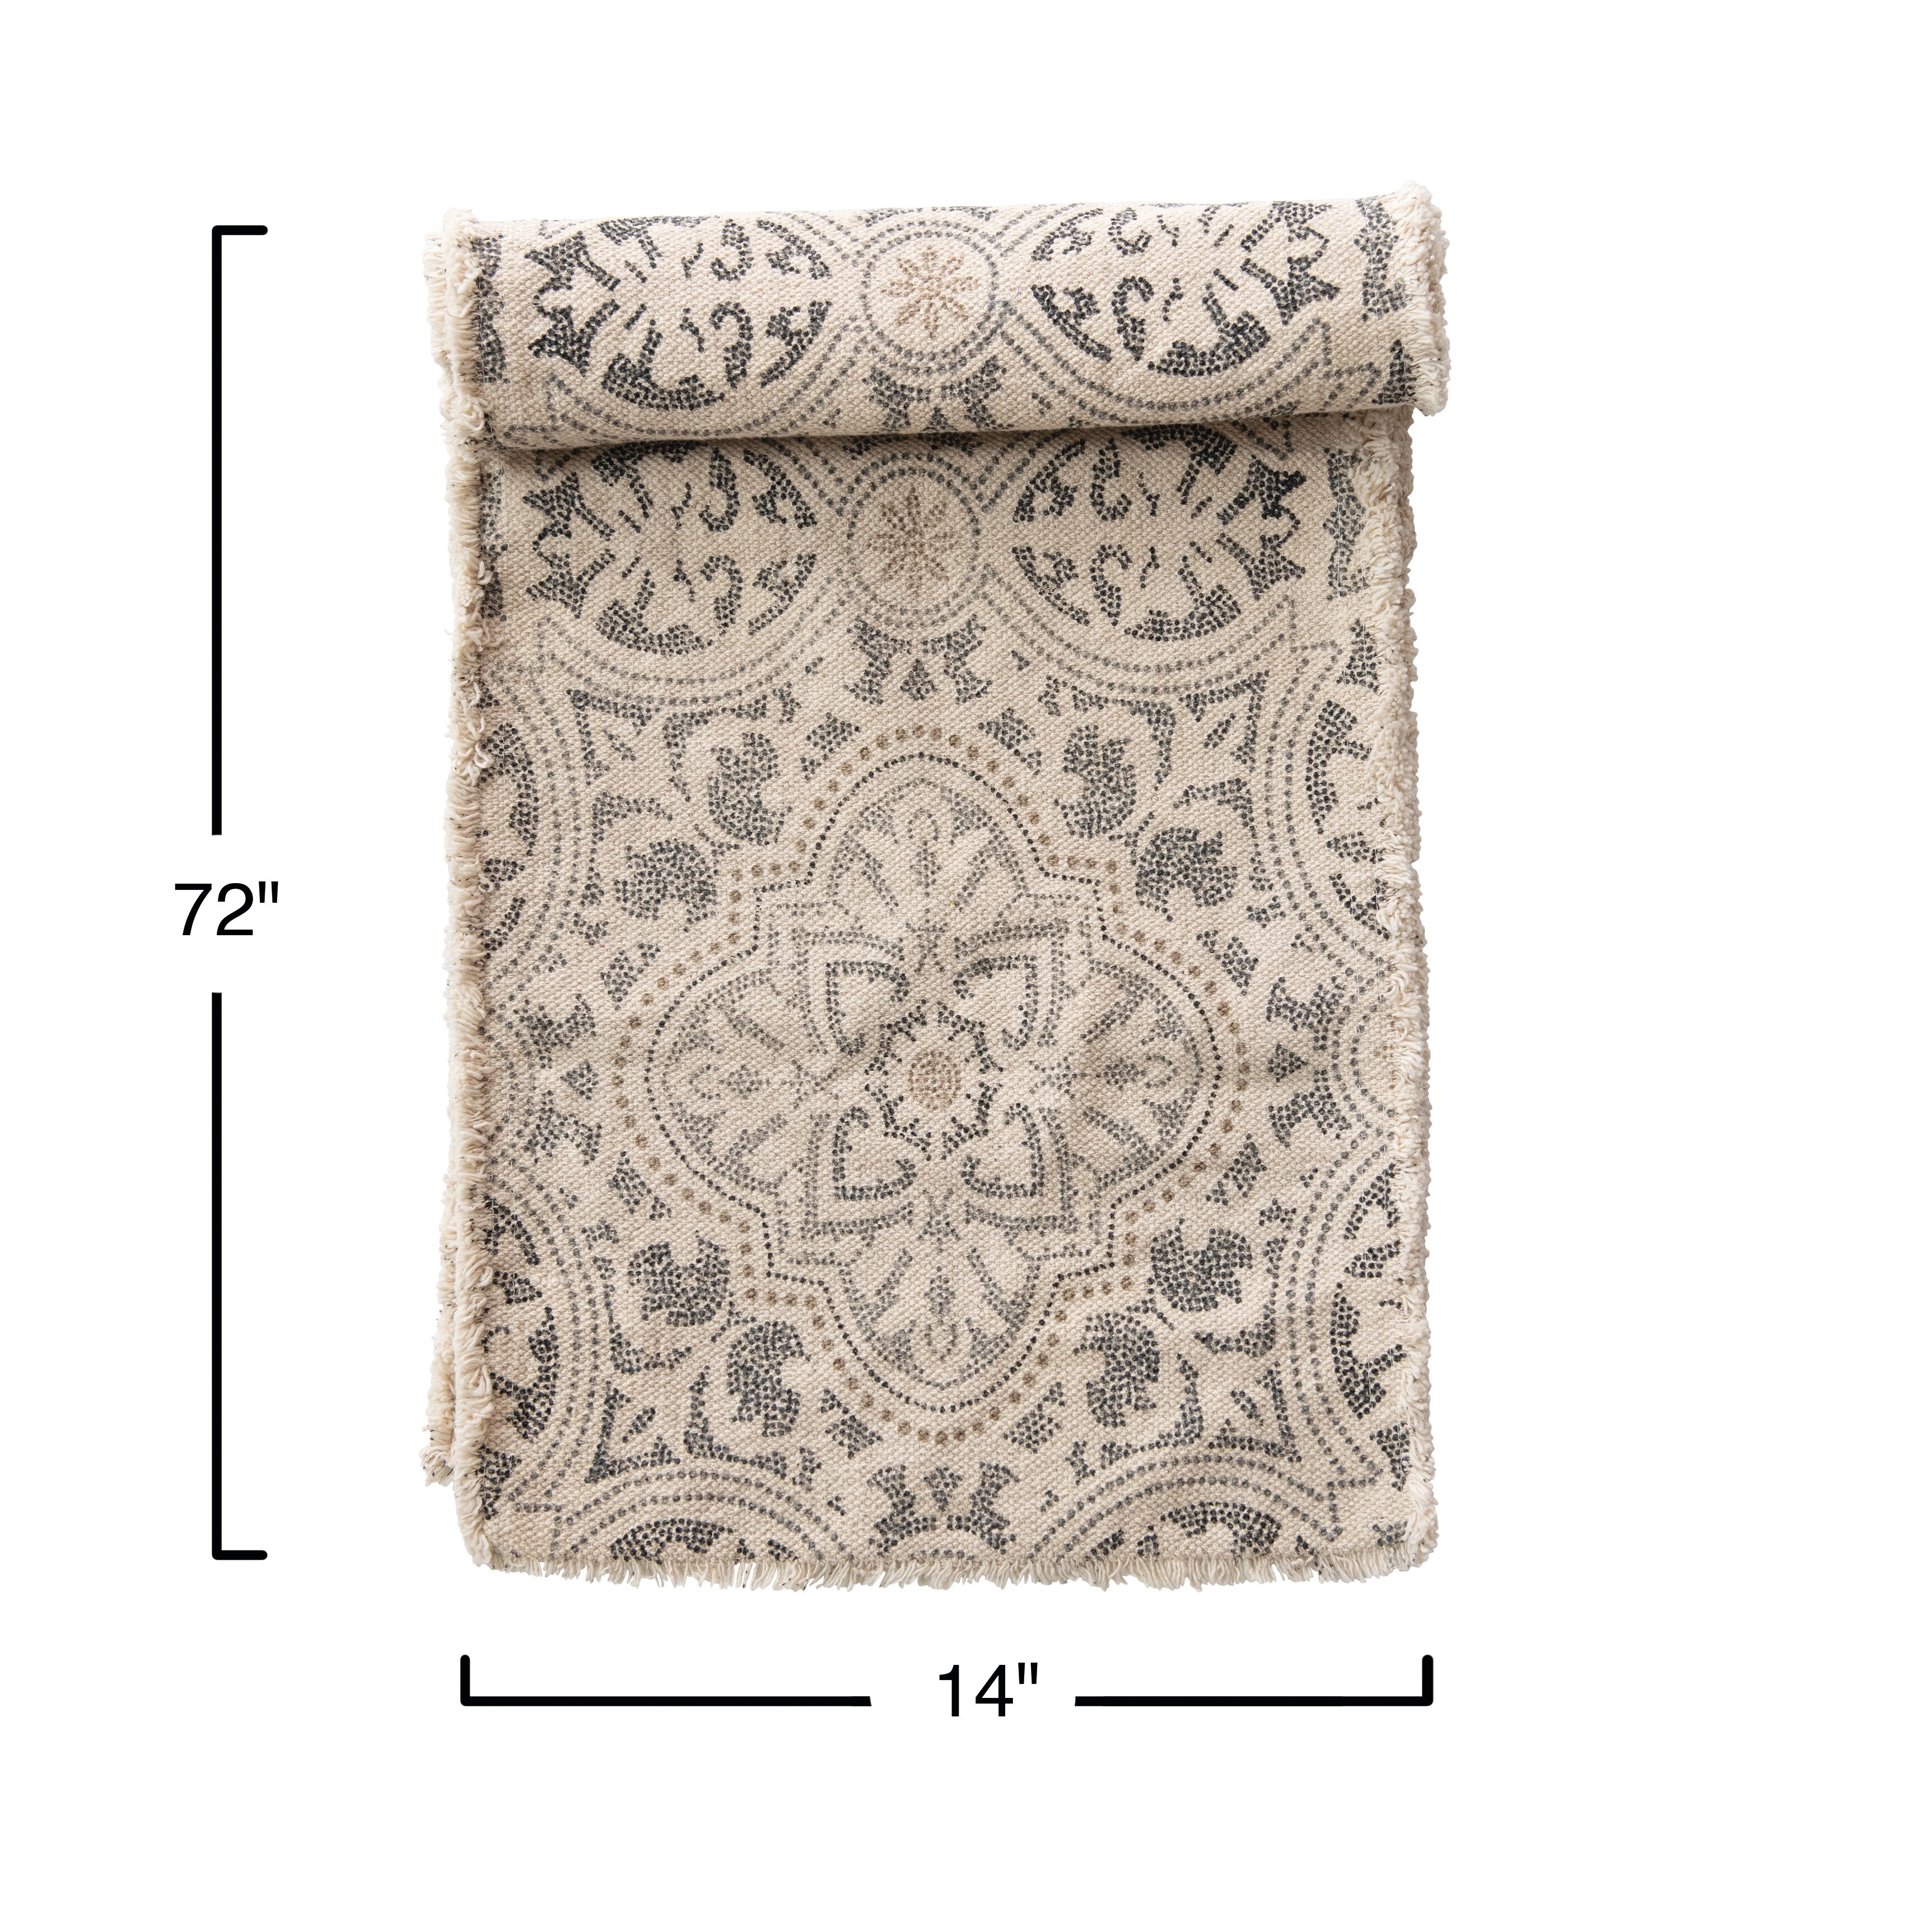 at Home Fray Edge Kitchen Towel 28.0L x 0.1H x 18.0W